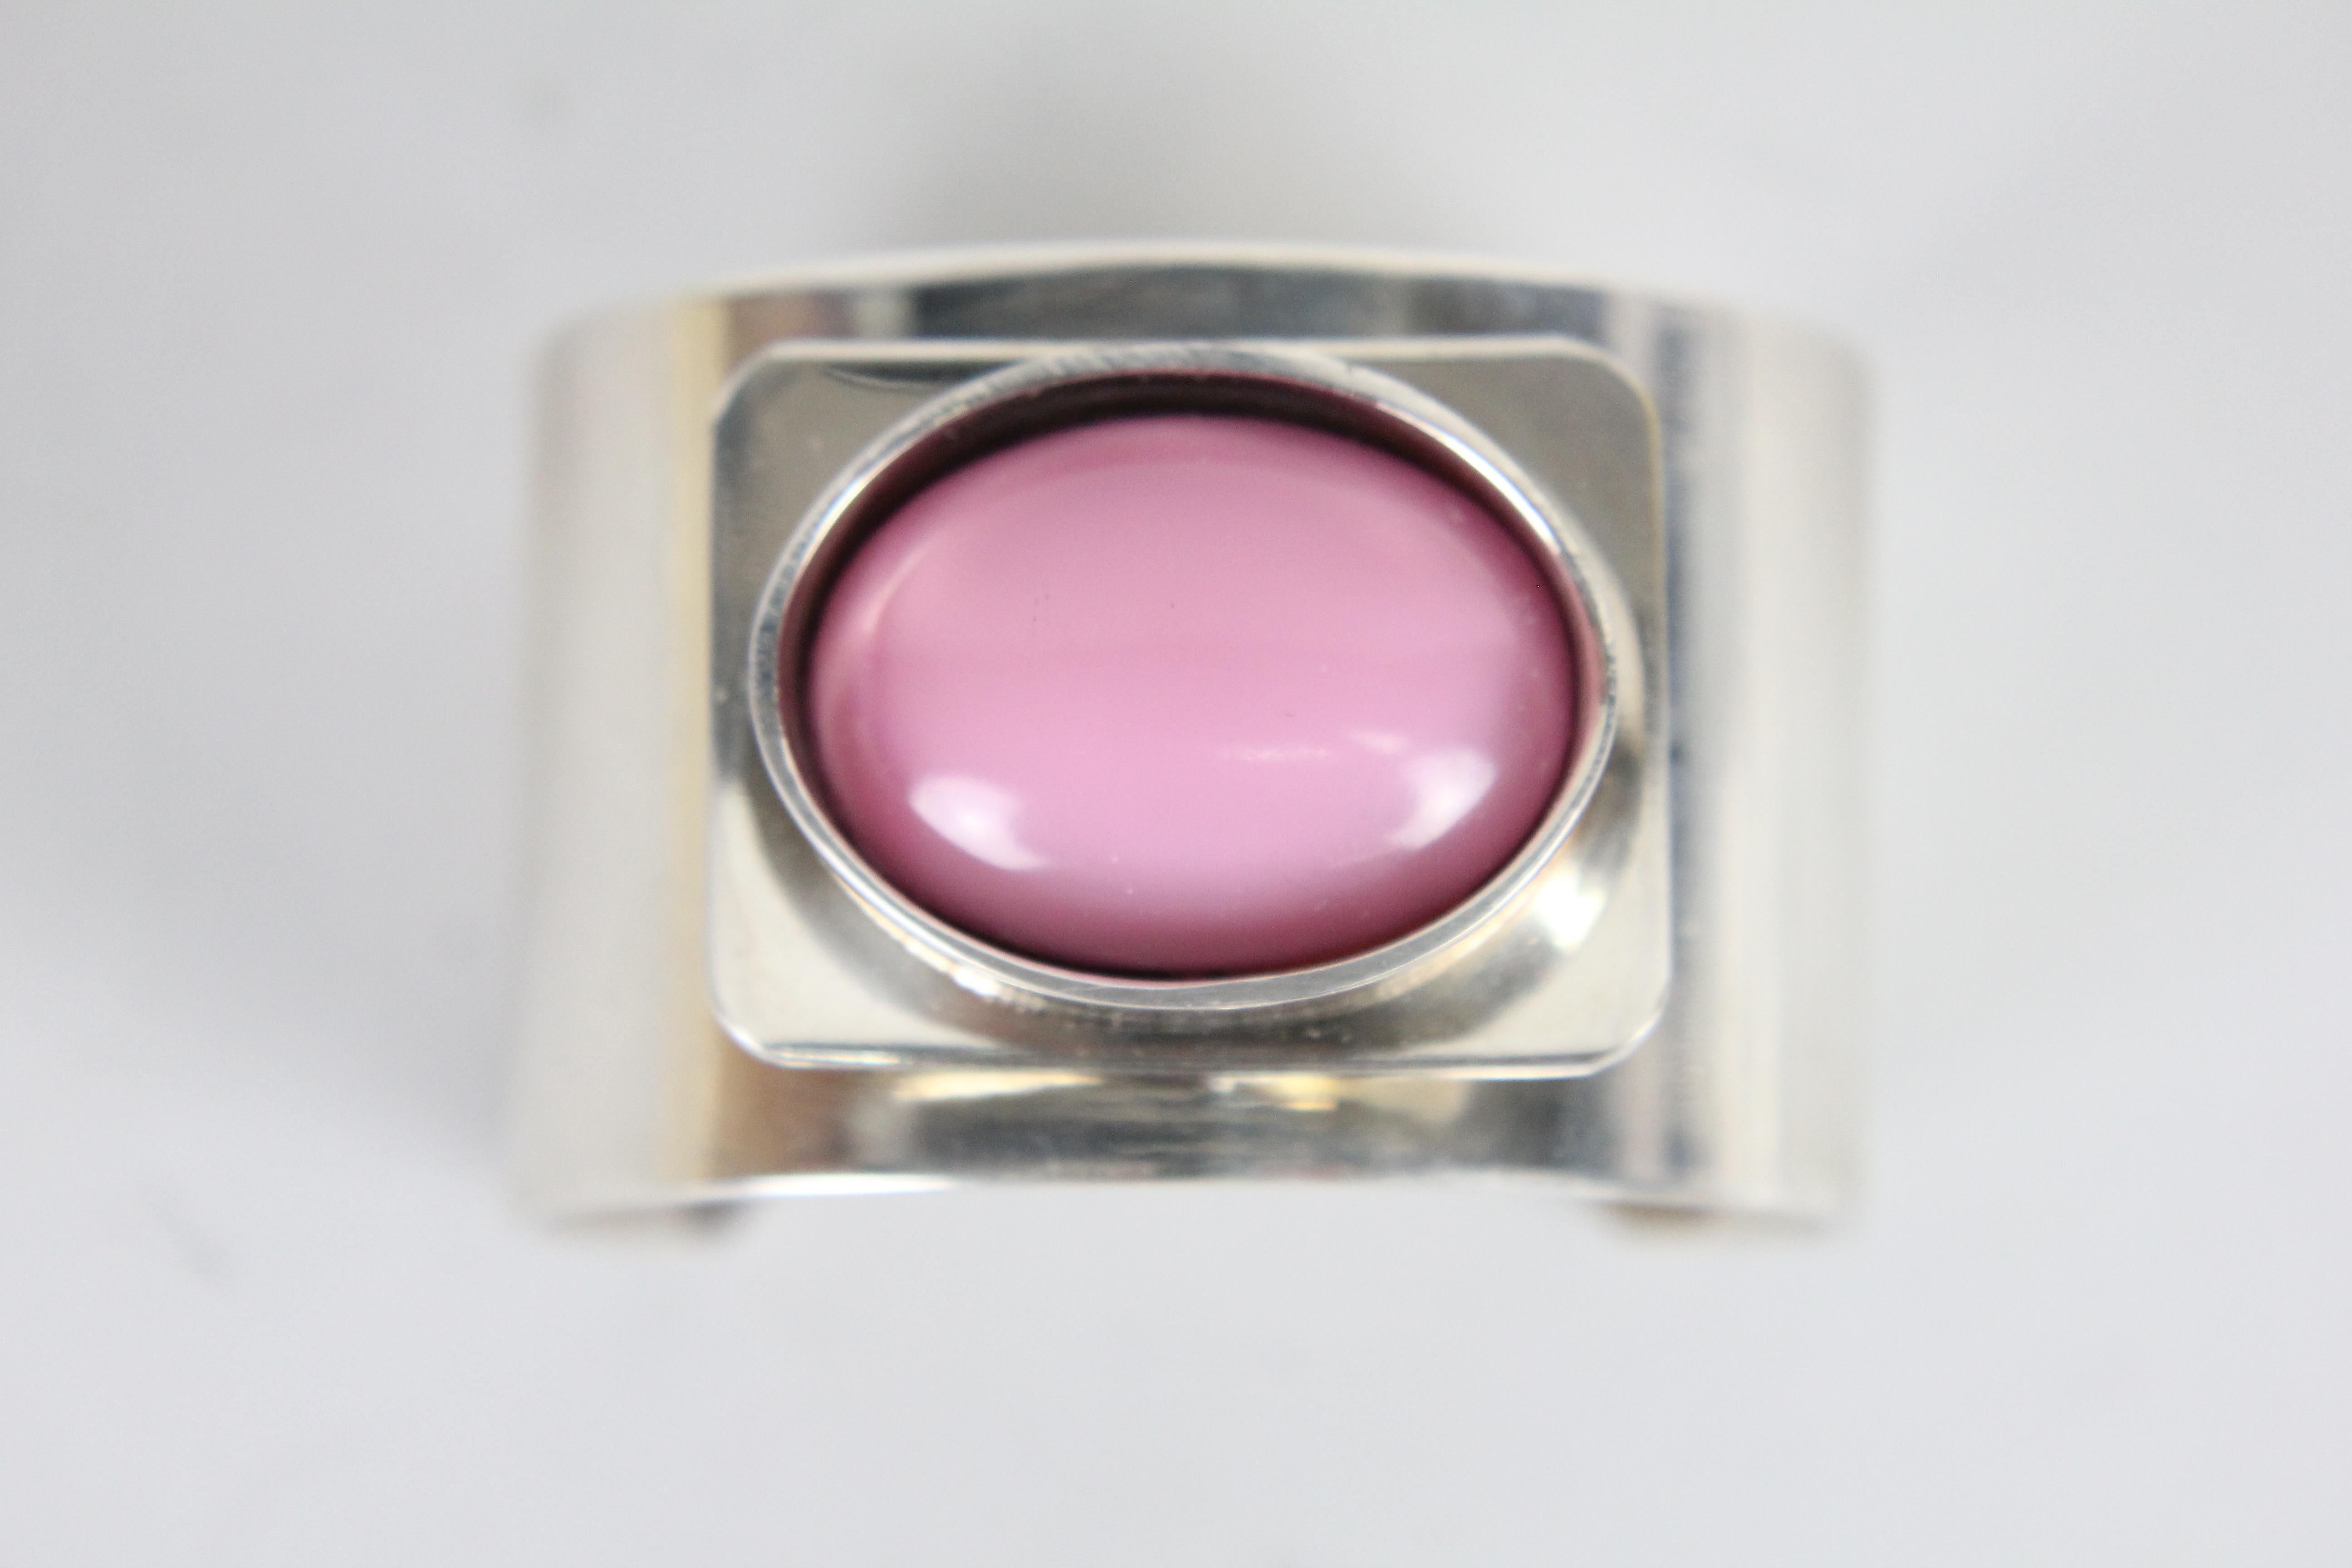 A wonderful bracelet with an unusually large pink stone.
Made in sterling silver and with a large cabochon cut rose quartz stone.
Designed in the 1970s by Jens Andersen and Erik Dennung for AD design in Copenhagen Denmark.
Rose quartz stone is 3cm x